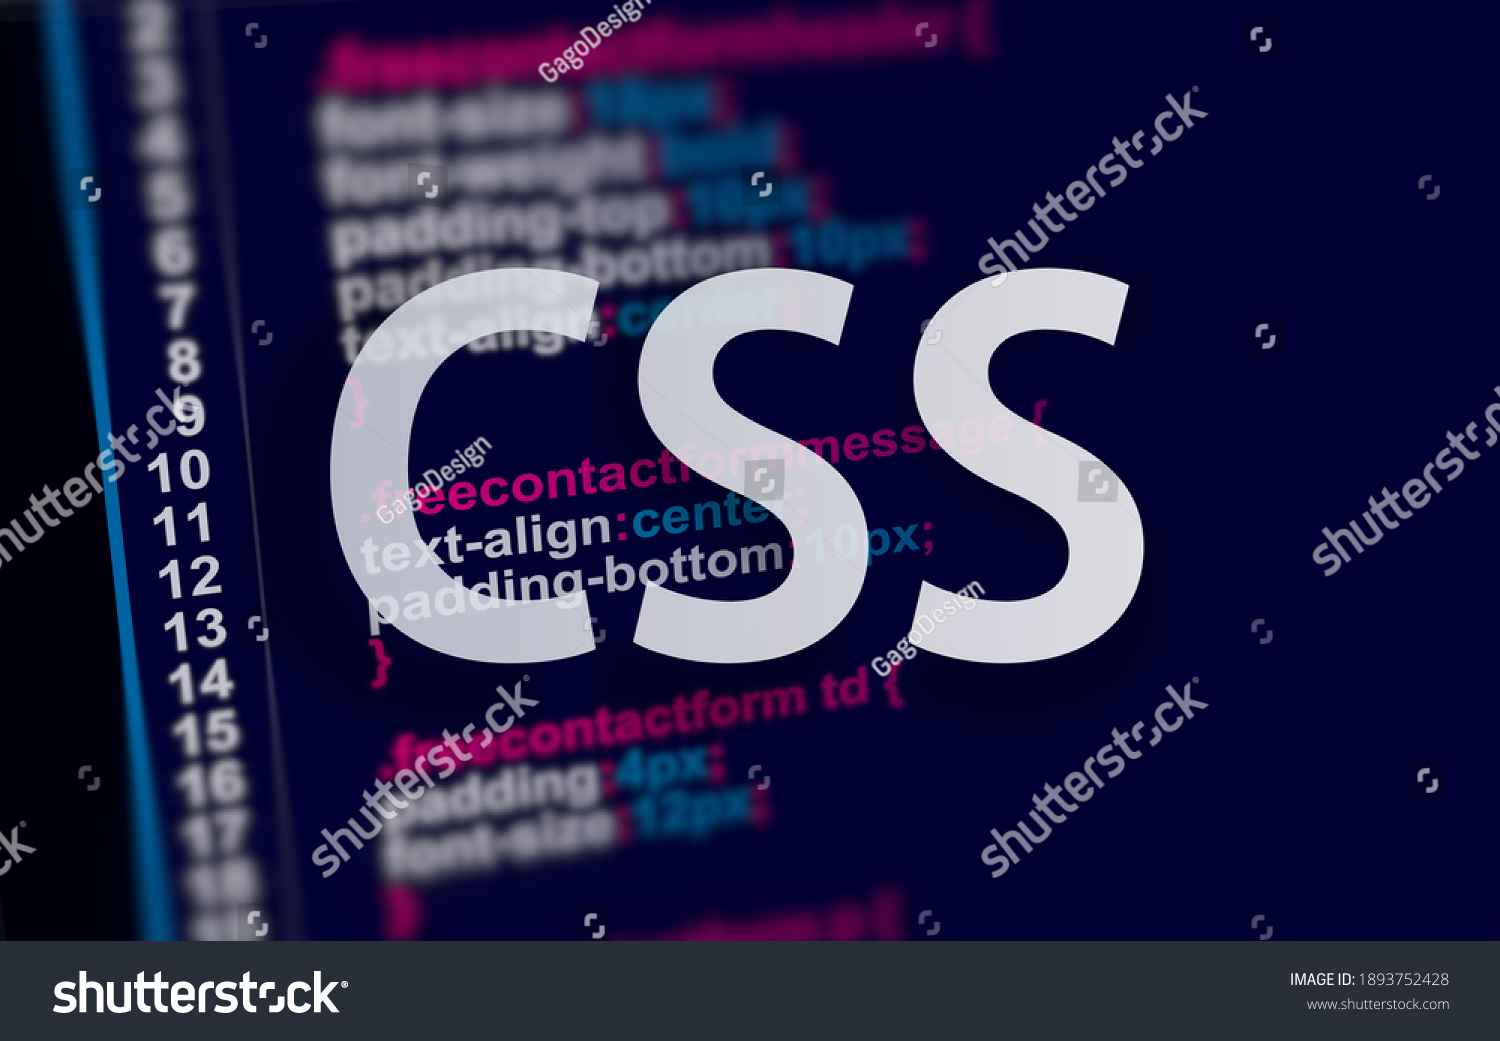 introducing-css-a-guide-to-cascading-style-sheets-for-web-design